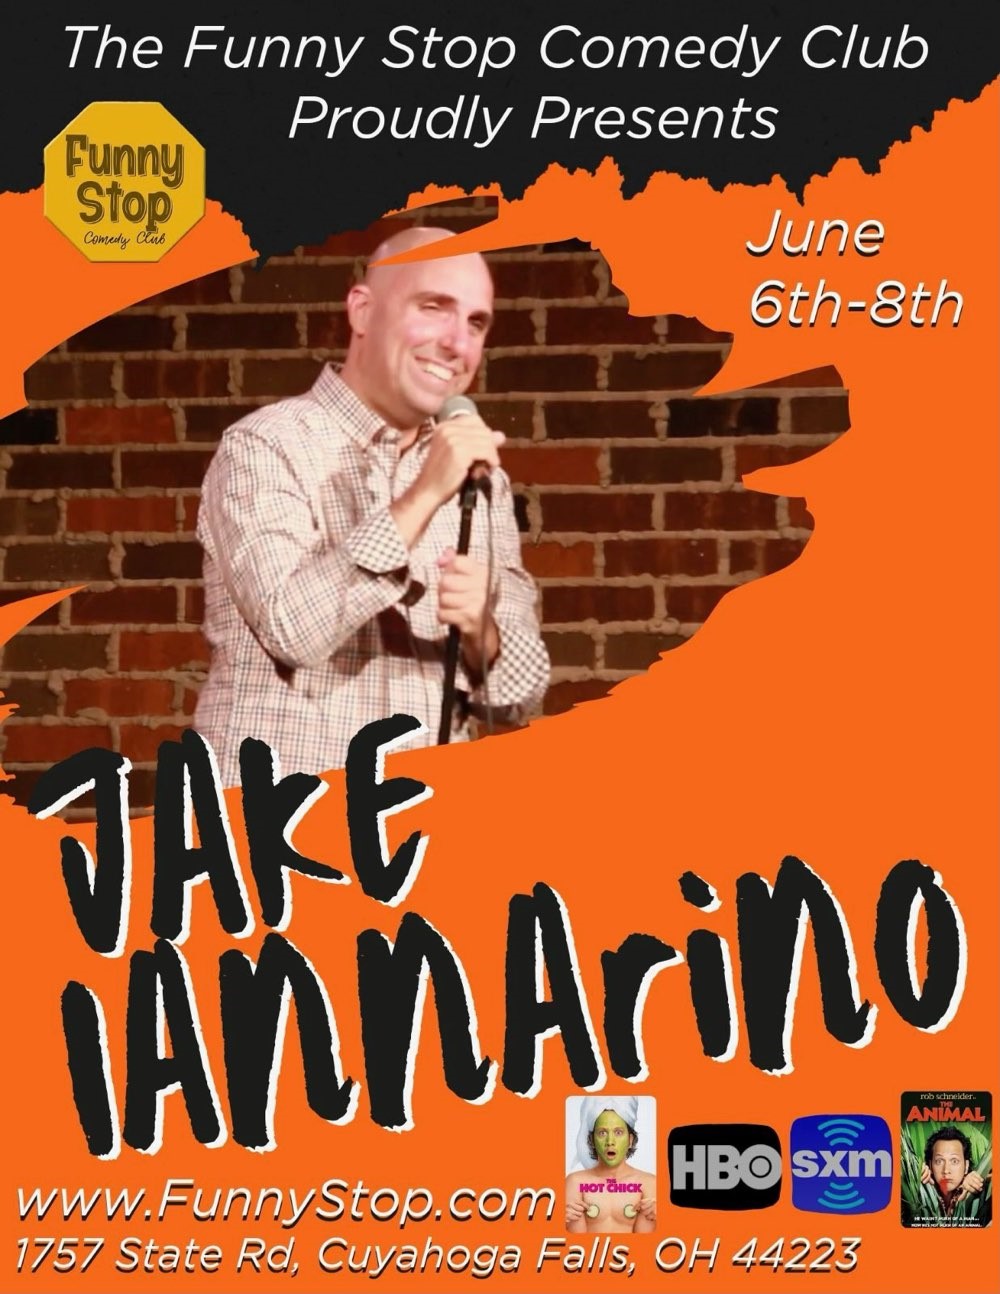 Jake Iannarino - Sat. 7:30PM Show Funny Stop Comedy Club on juin 08, 19:30@Funny Stop Comedy Club - Achetez des billets et obtenez des informations surFunny Stop funnystop.online